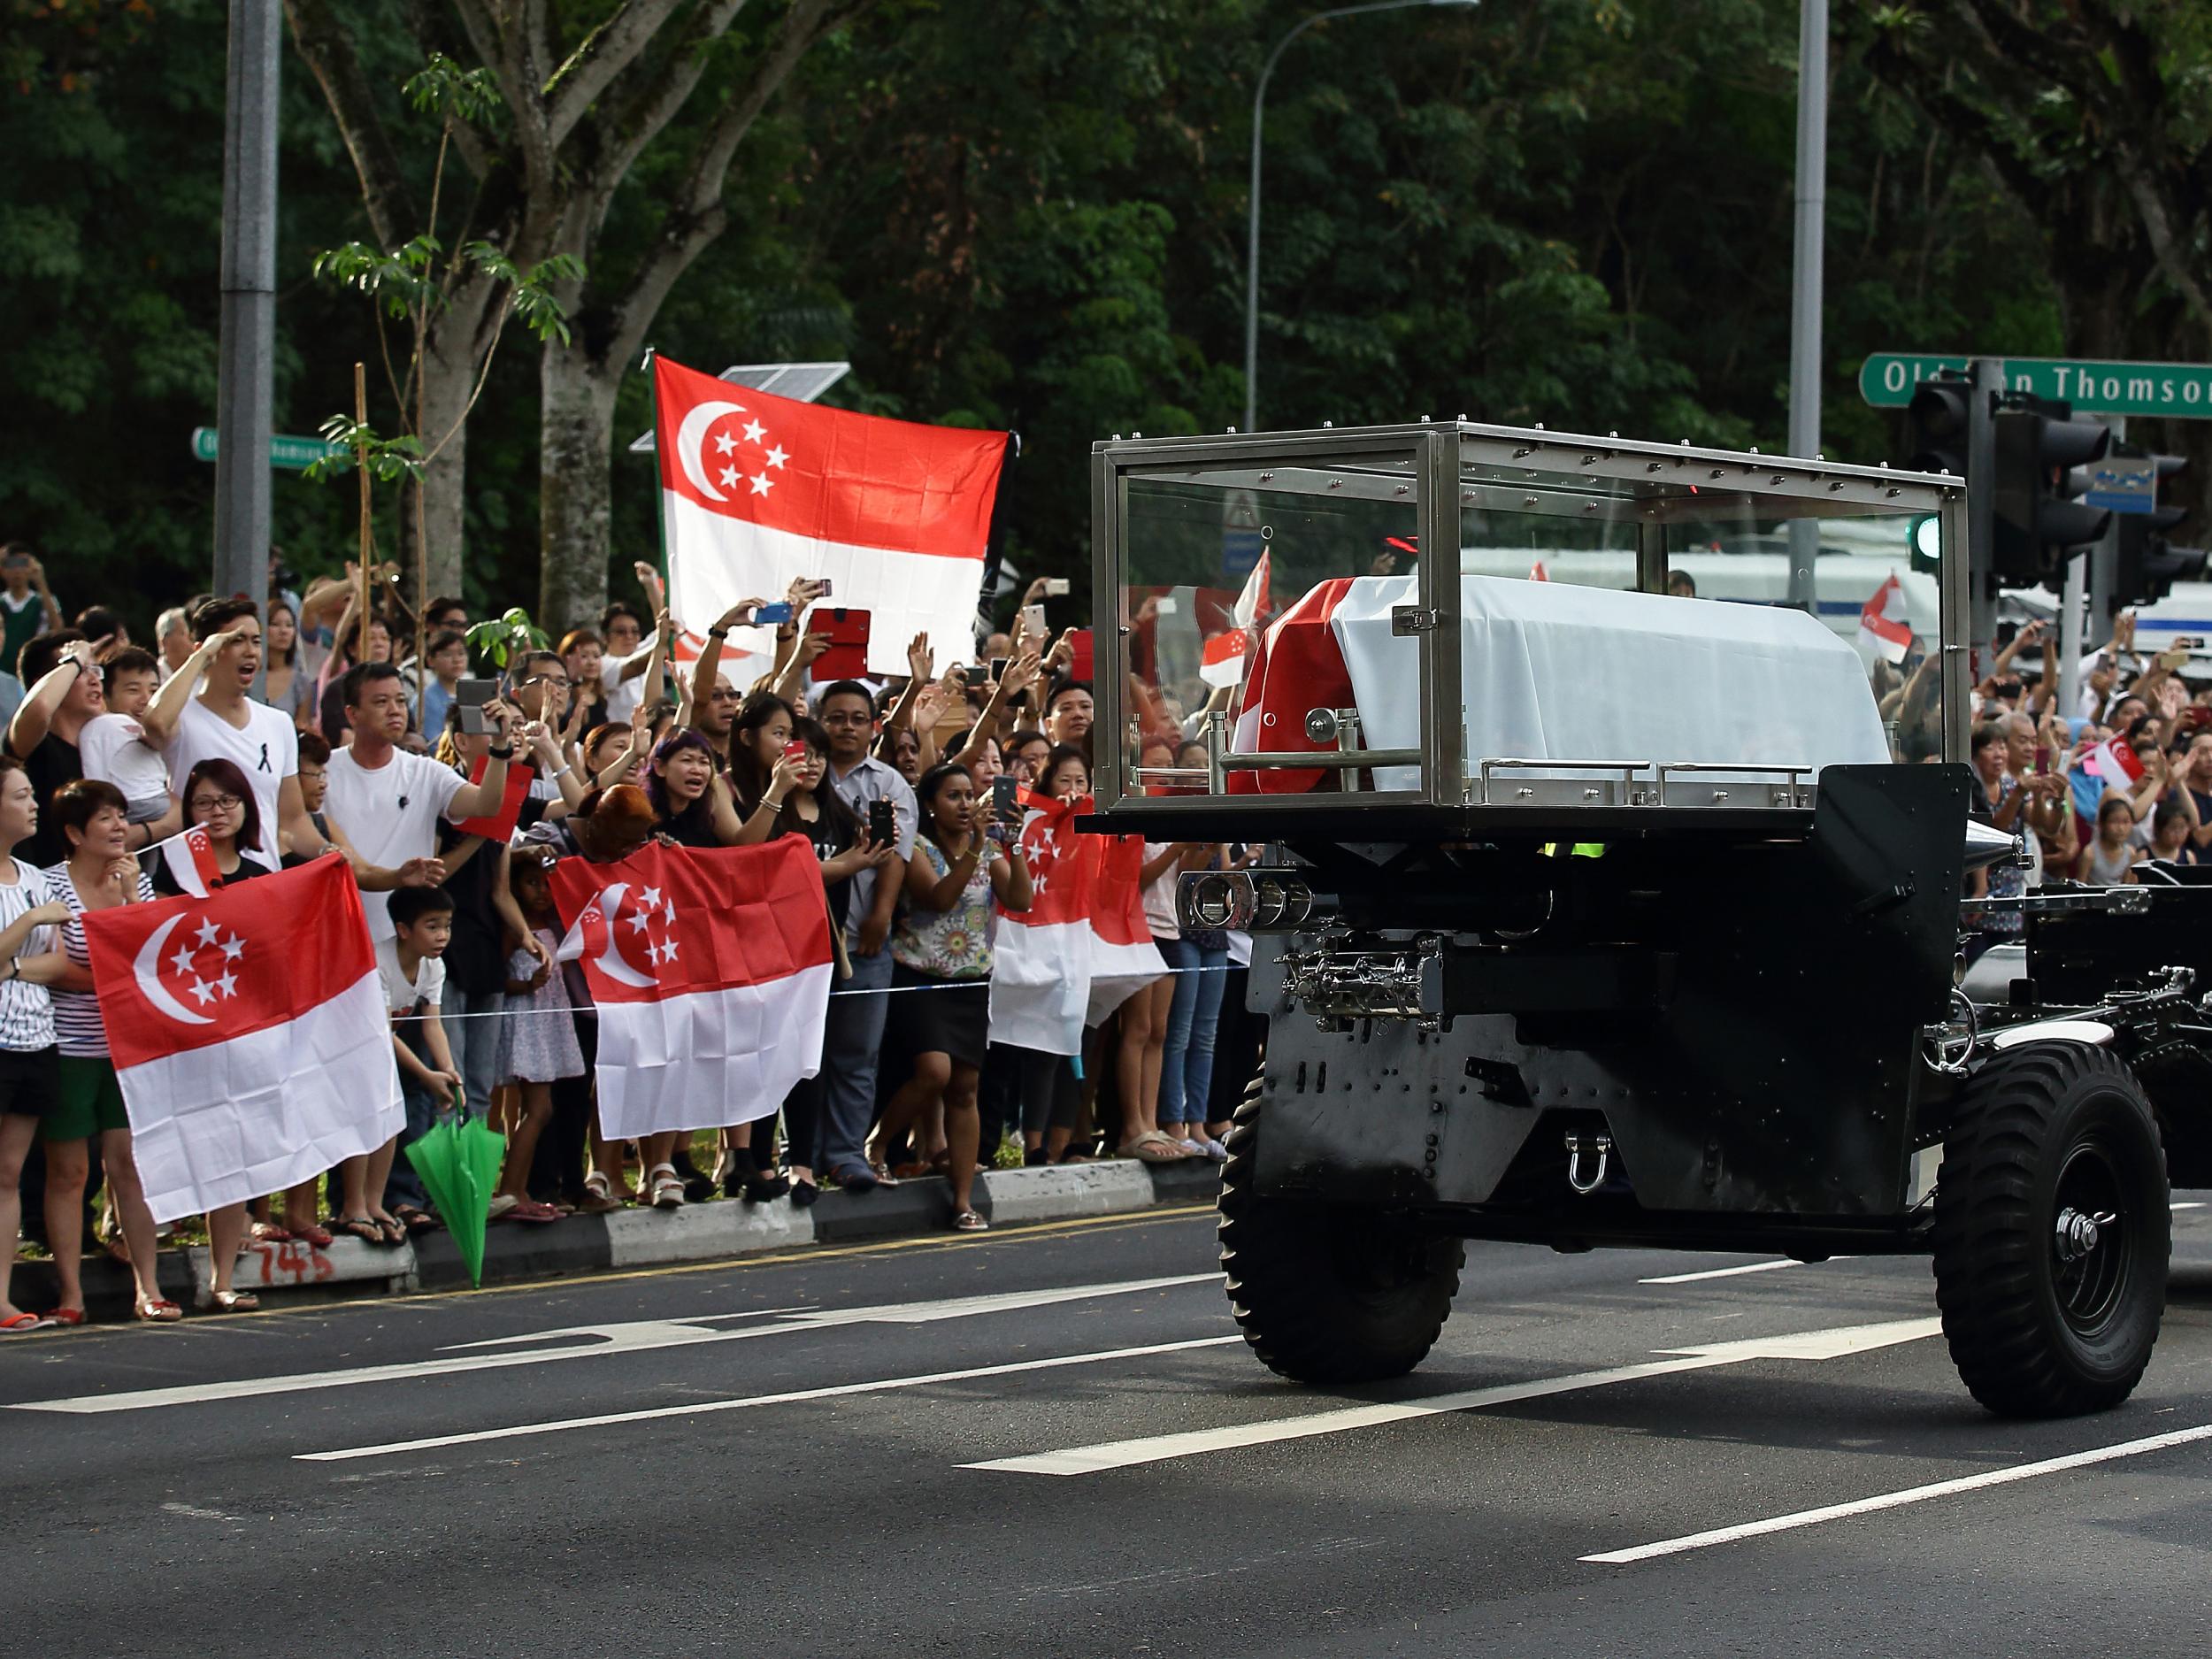 The funeral of former Singaporean Prime Minister Lee Kuan Yew, 2015